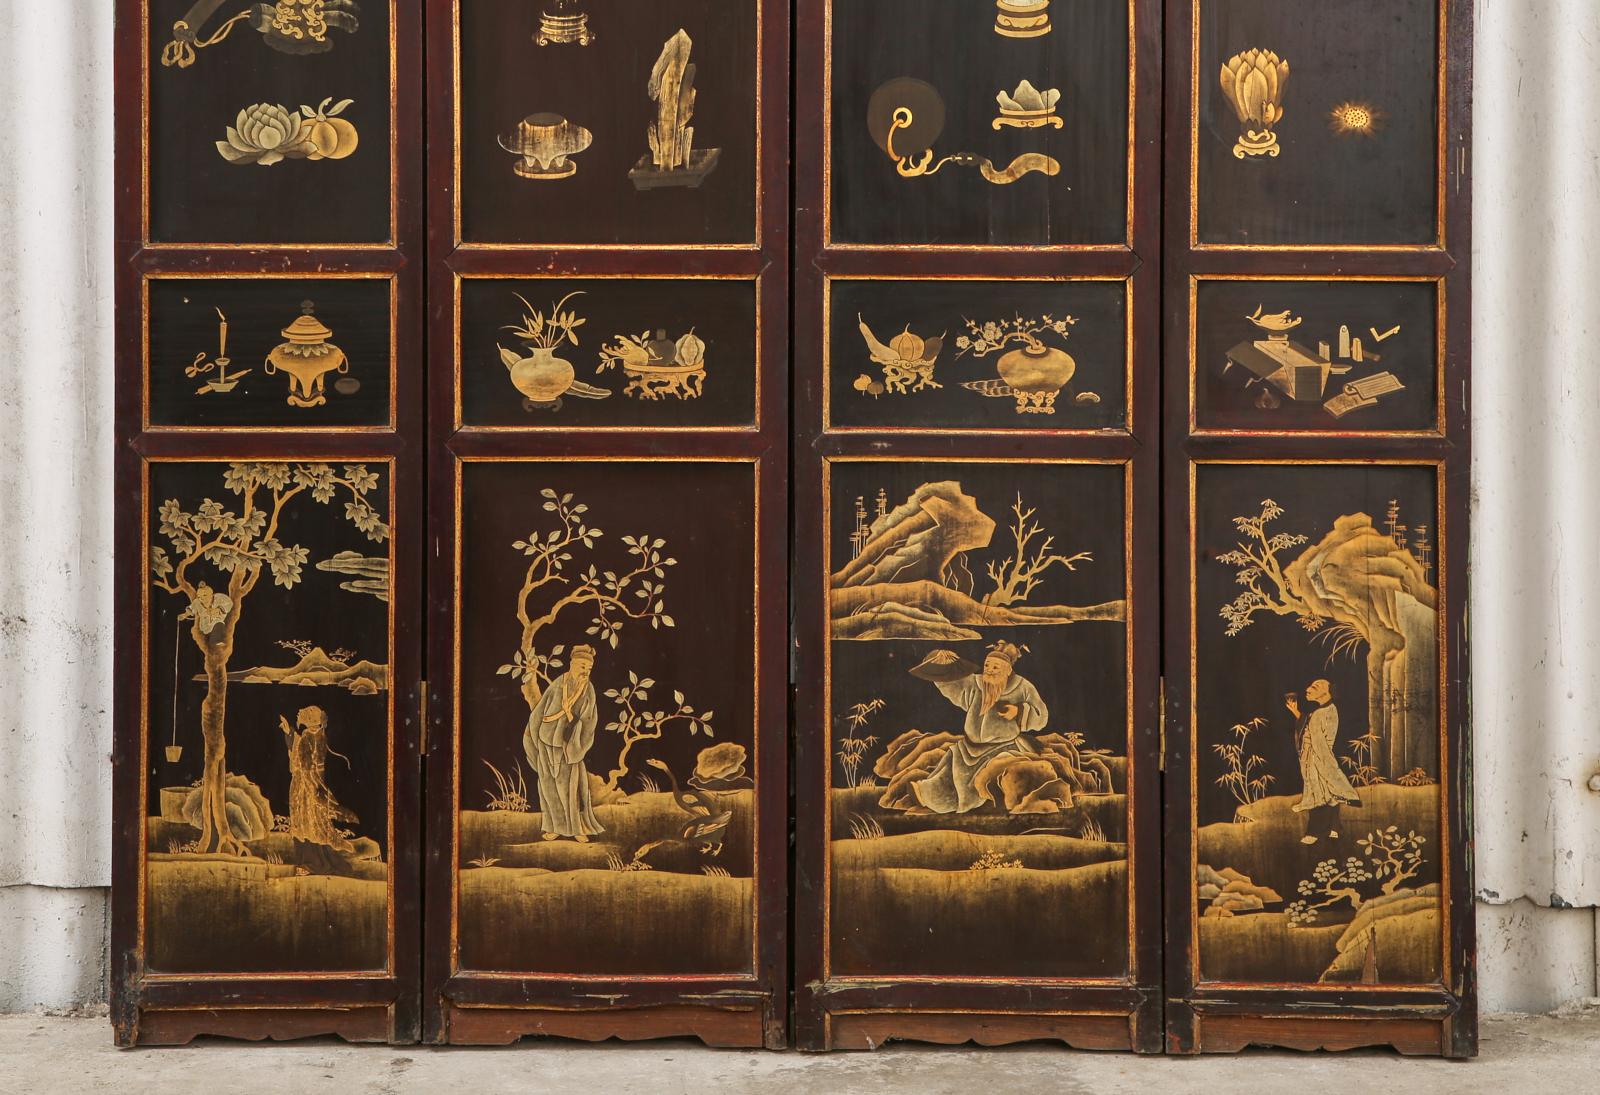 Brass Chinese Qing Four Panel Lacquered Incised Coromandel Screen For Sale